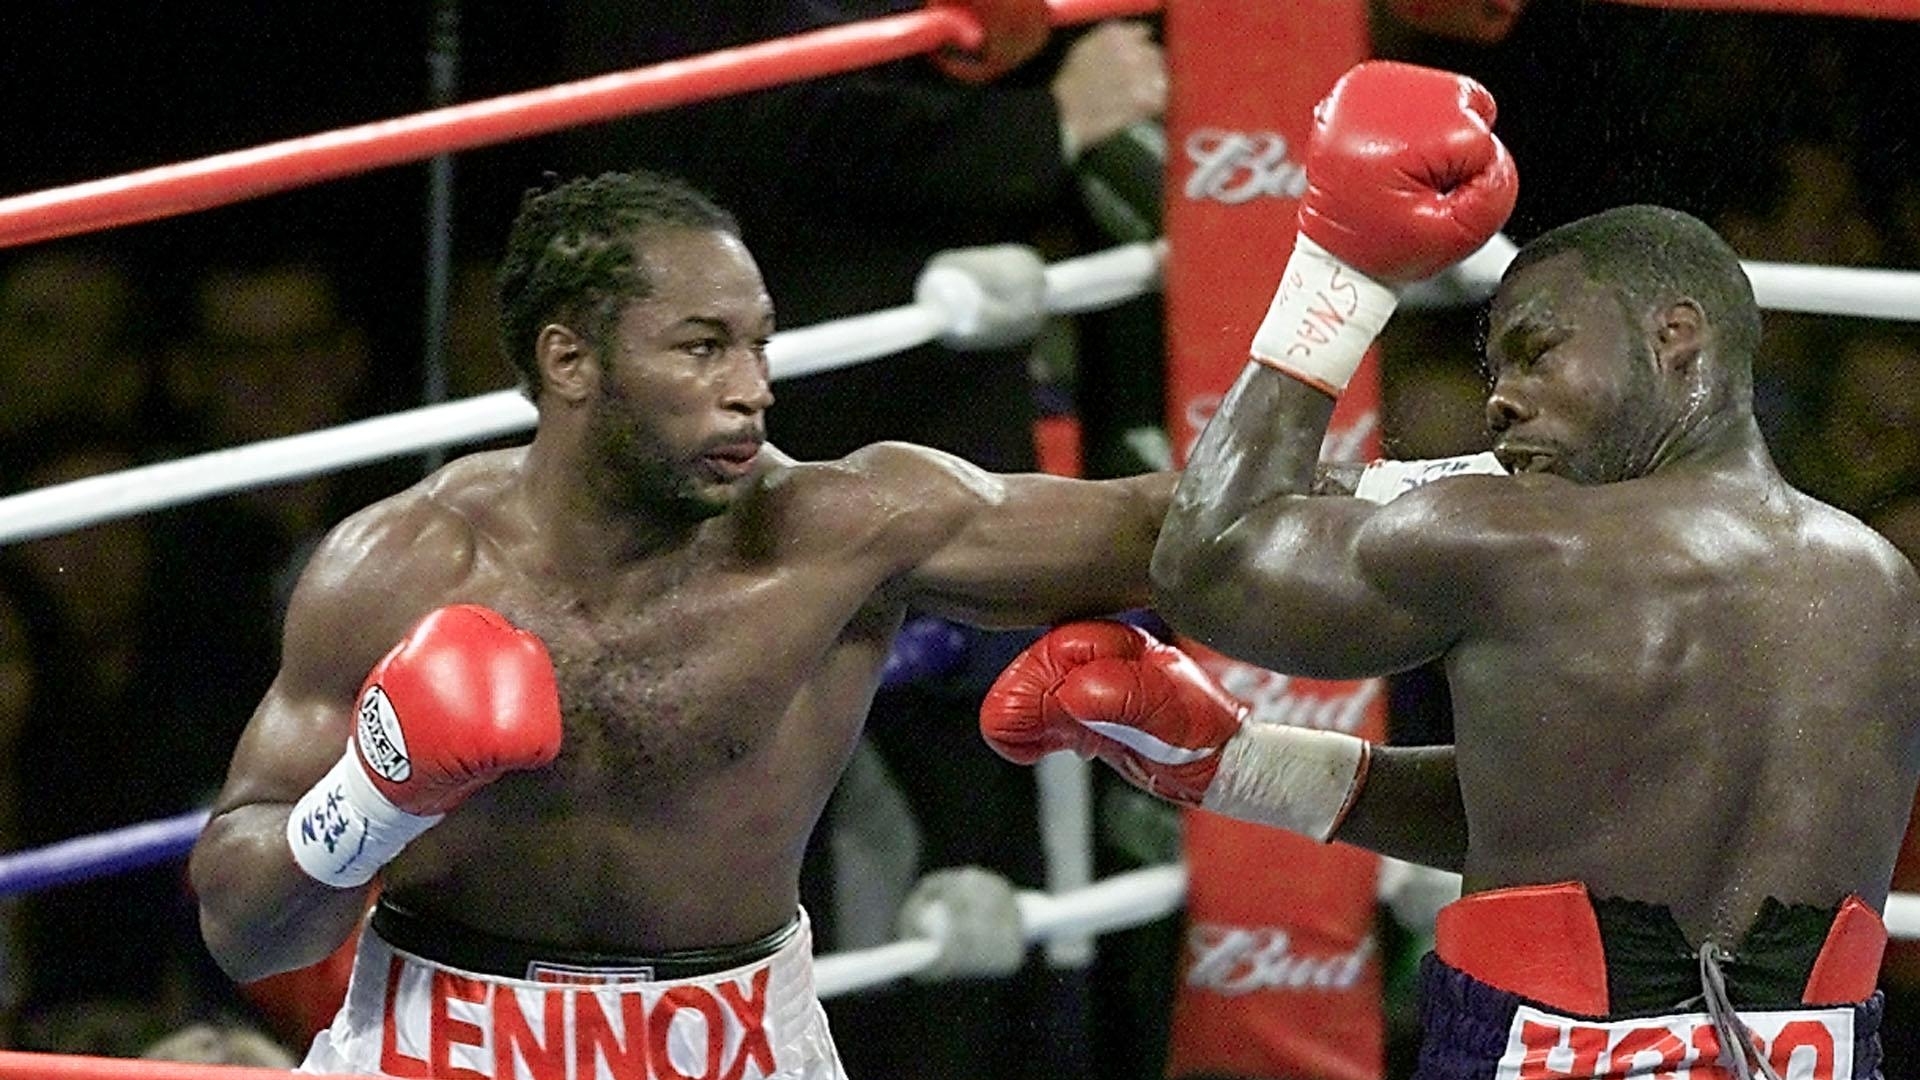 Lennox Lewis tells leading heavyweight contender to find a new trainer